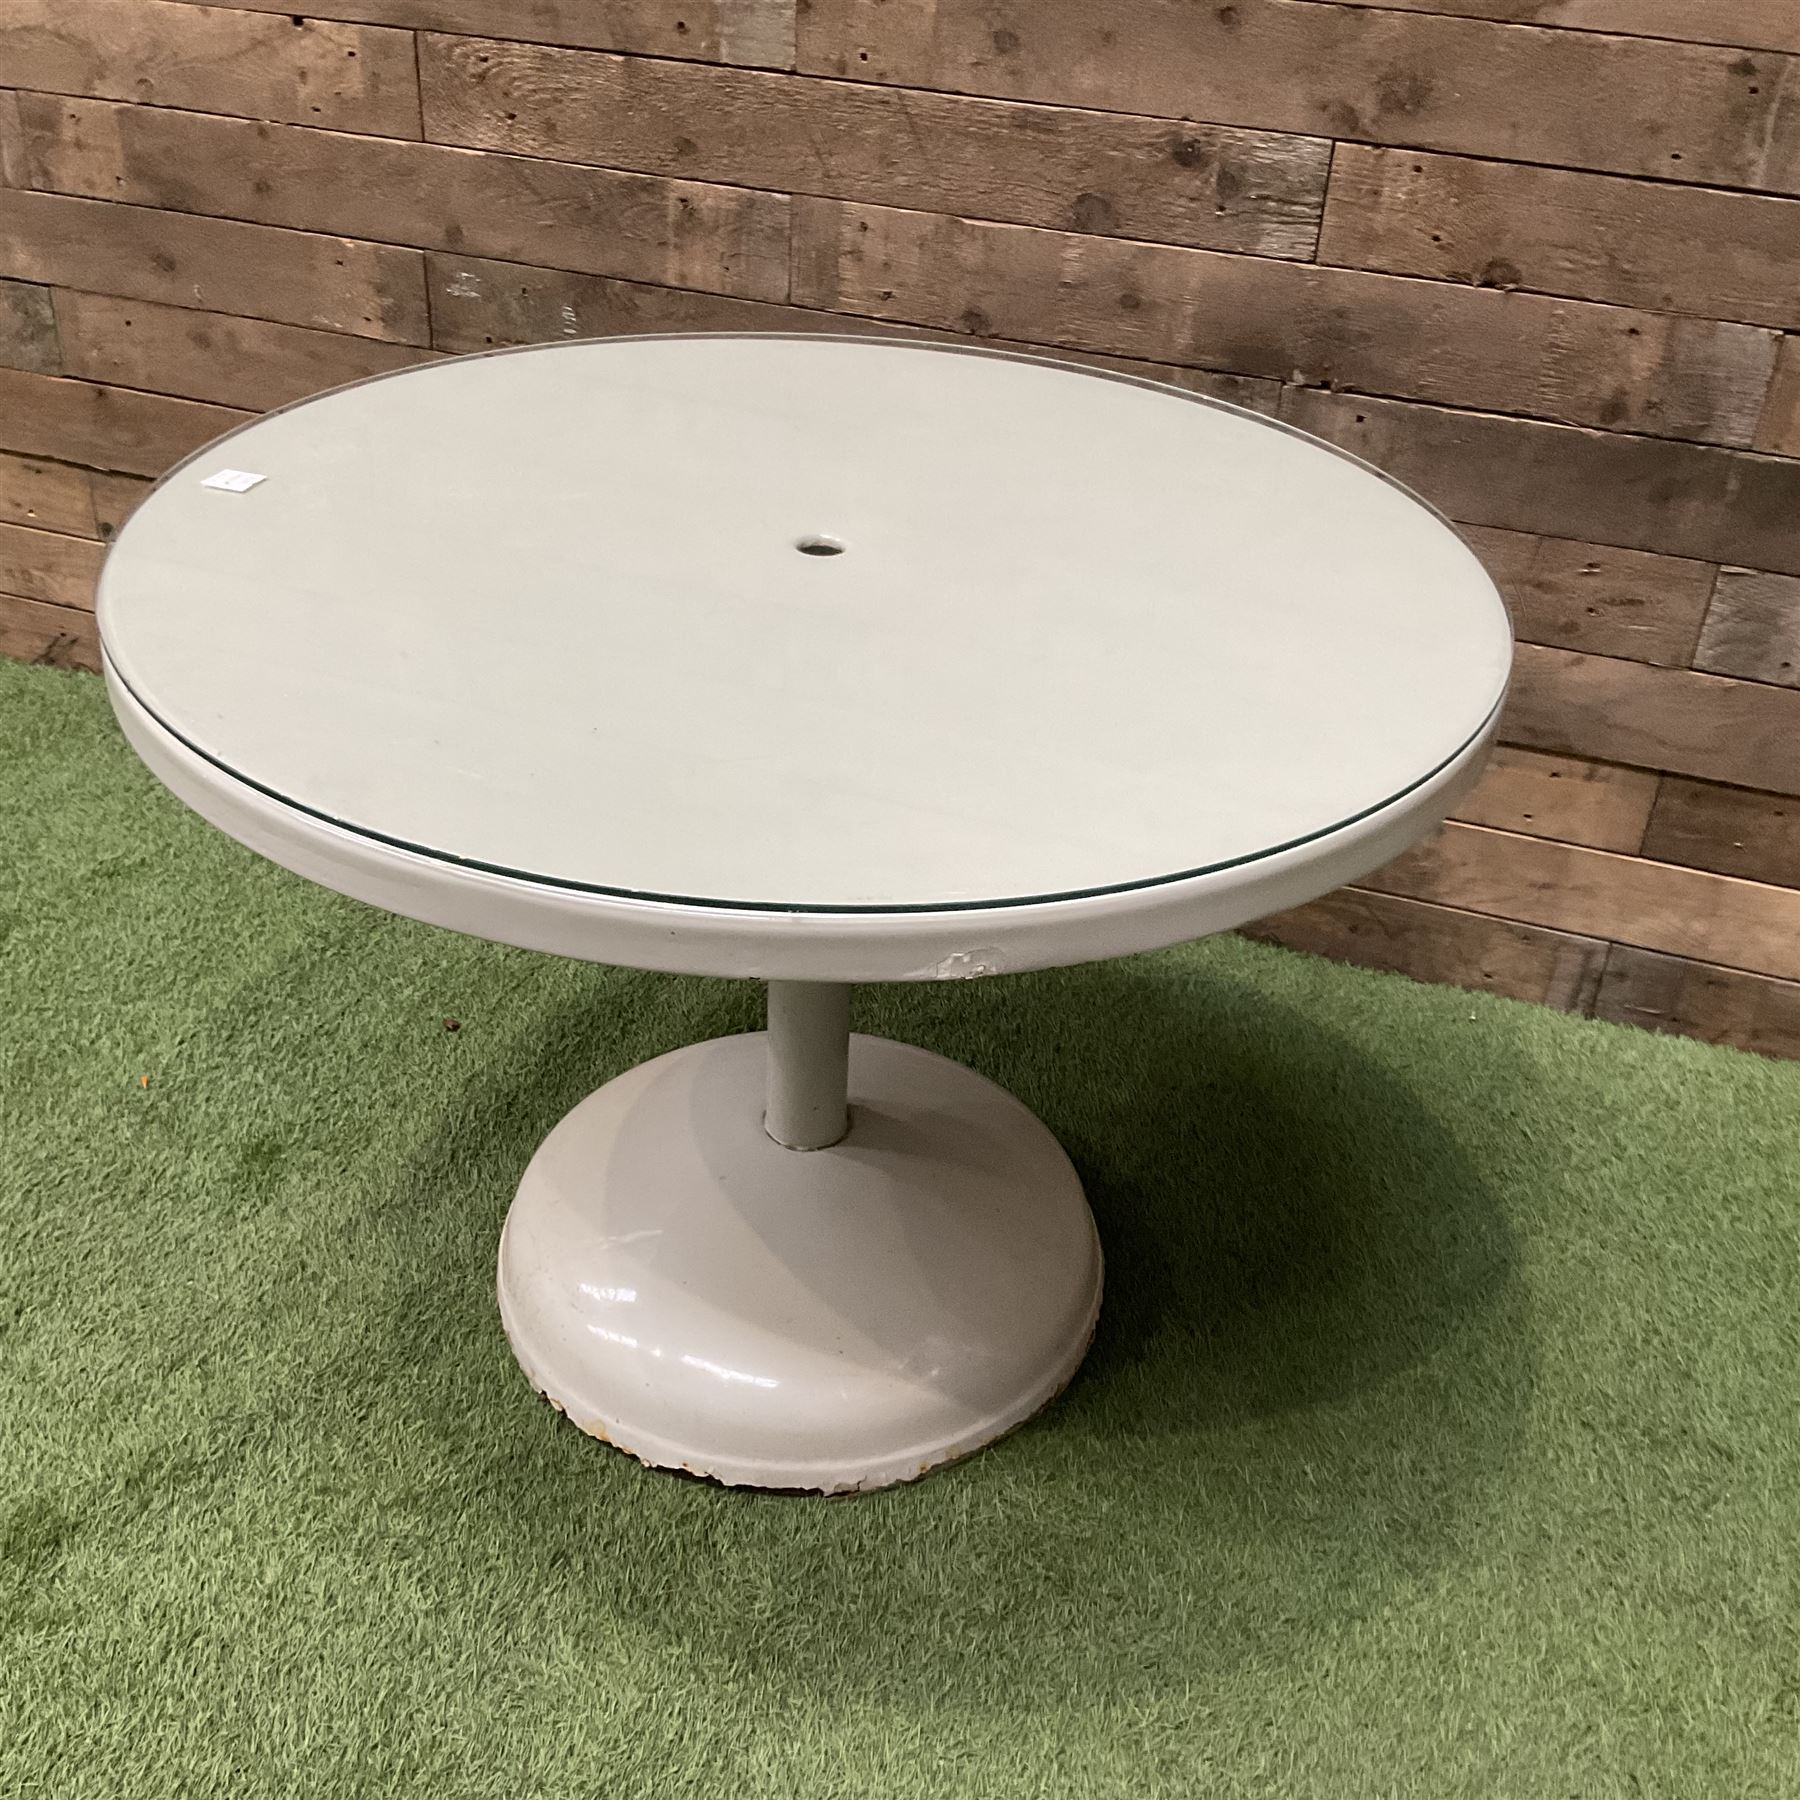 Circular white painted pedestal table with glass top - Image 2 of 5